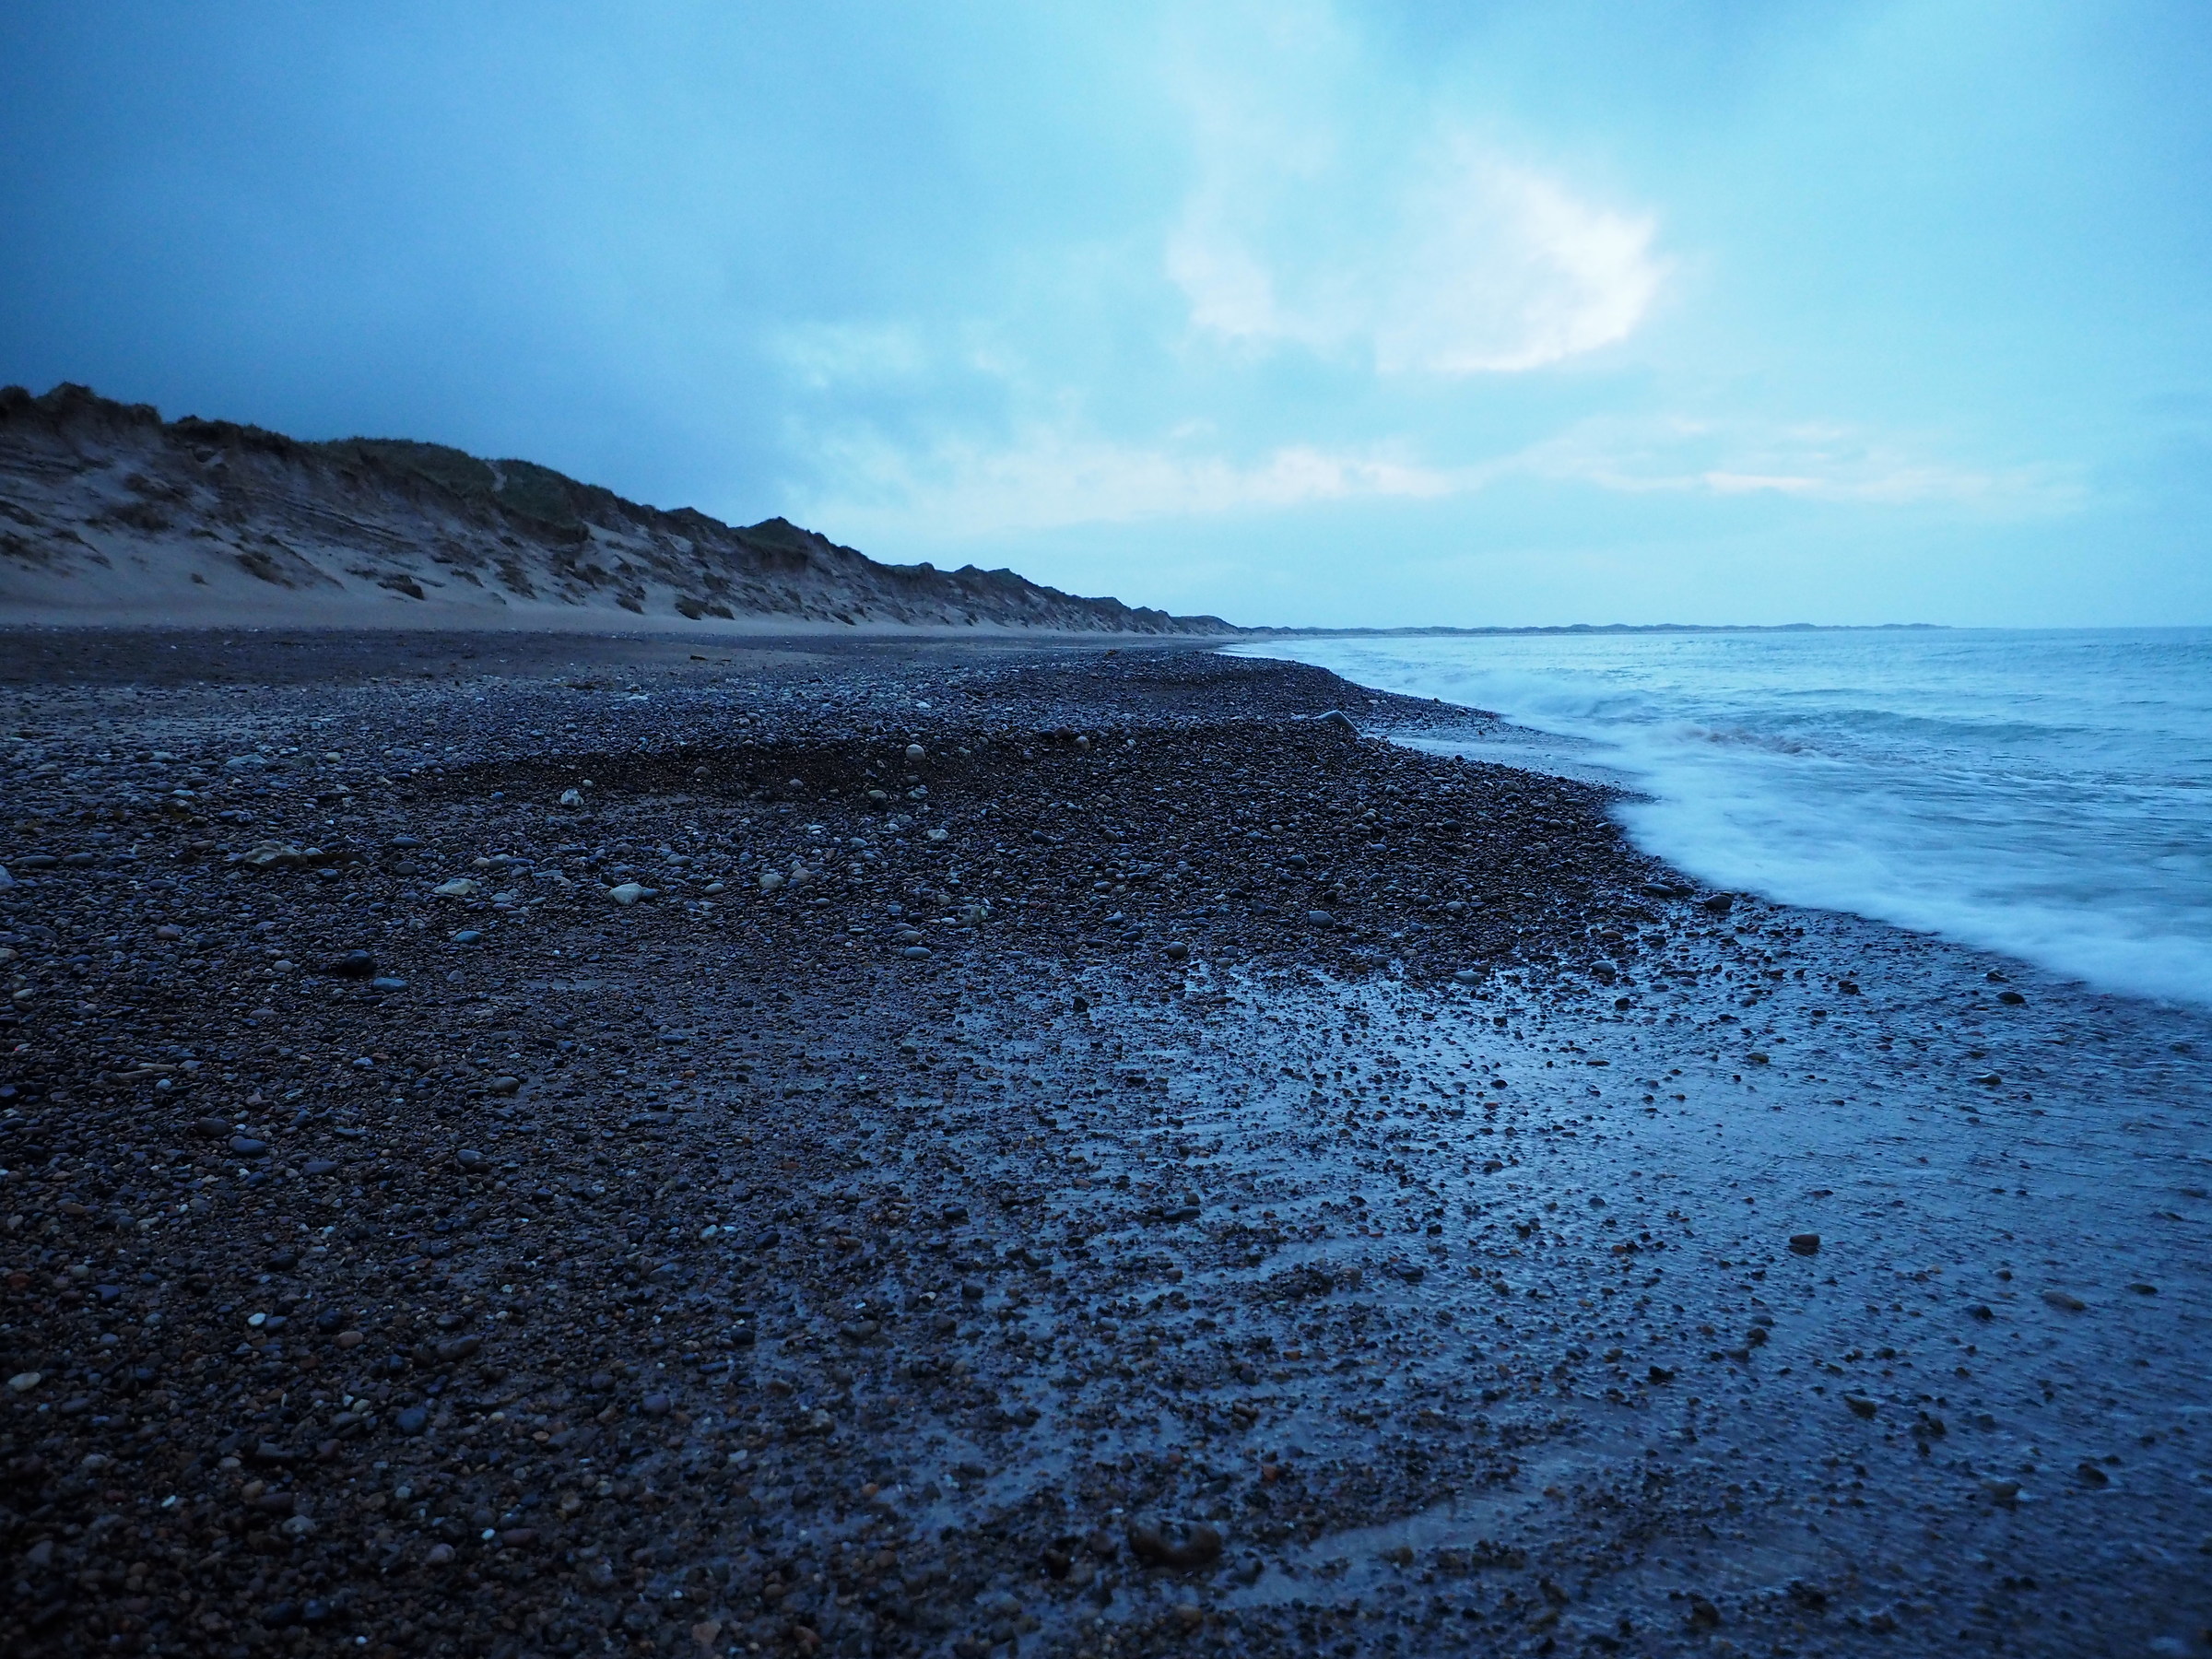 endless beaches of Denmark, beaten by sea and winds...